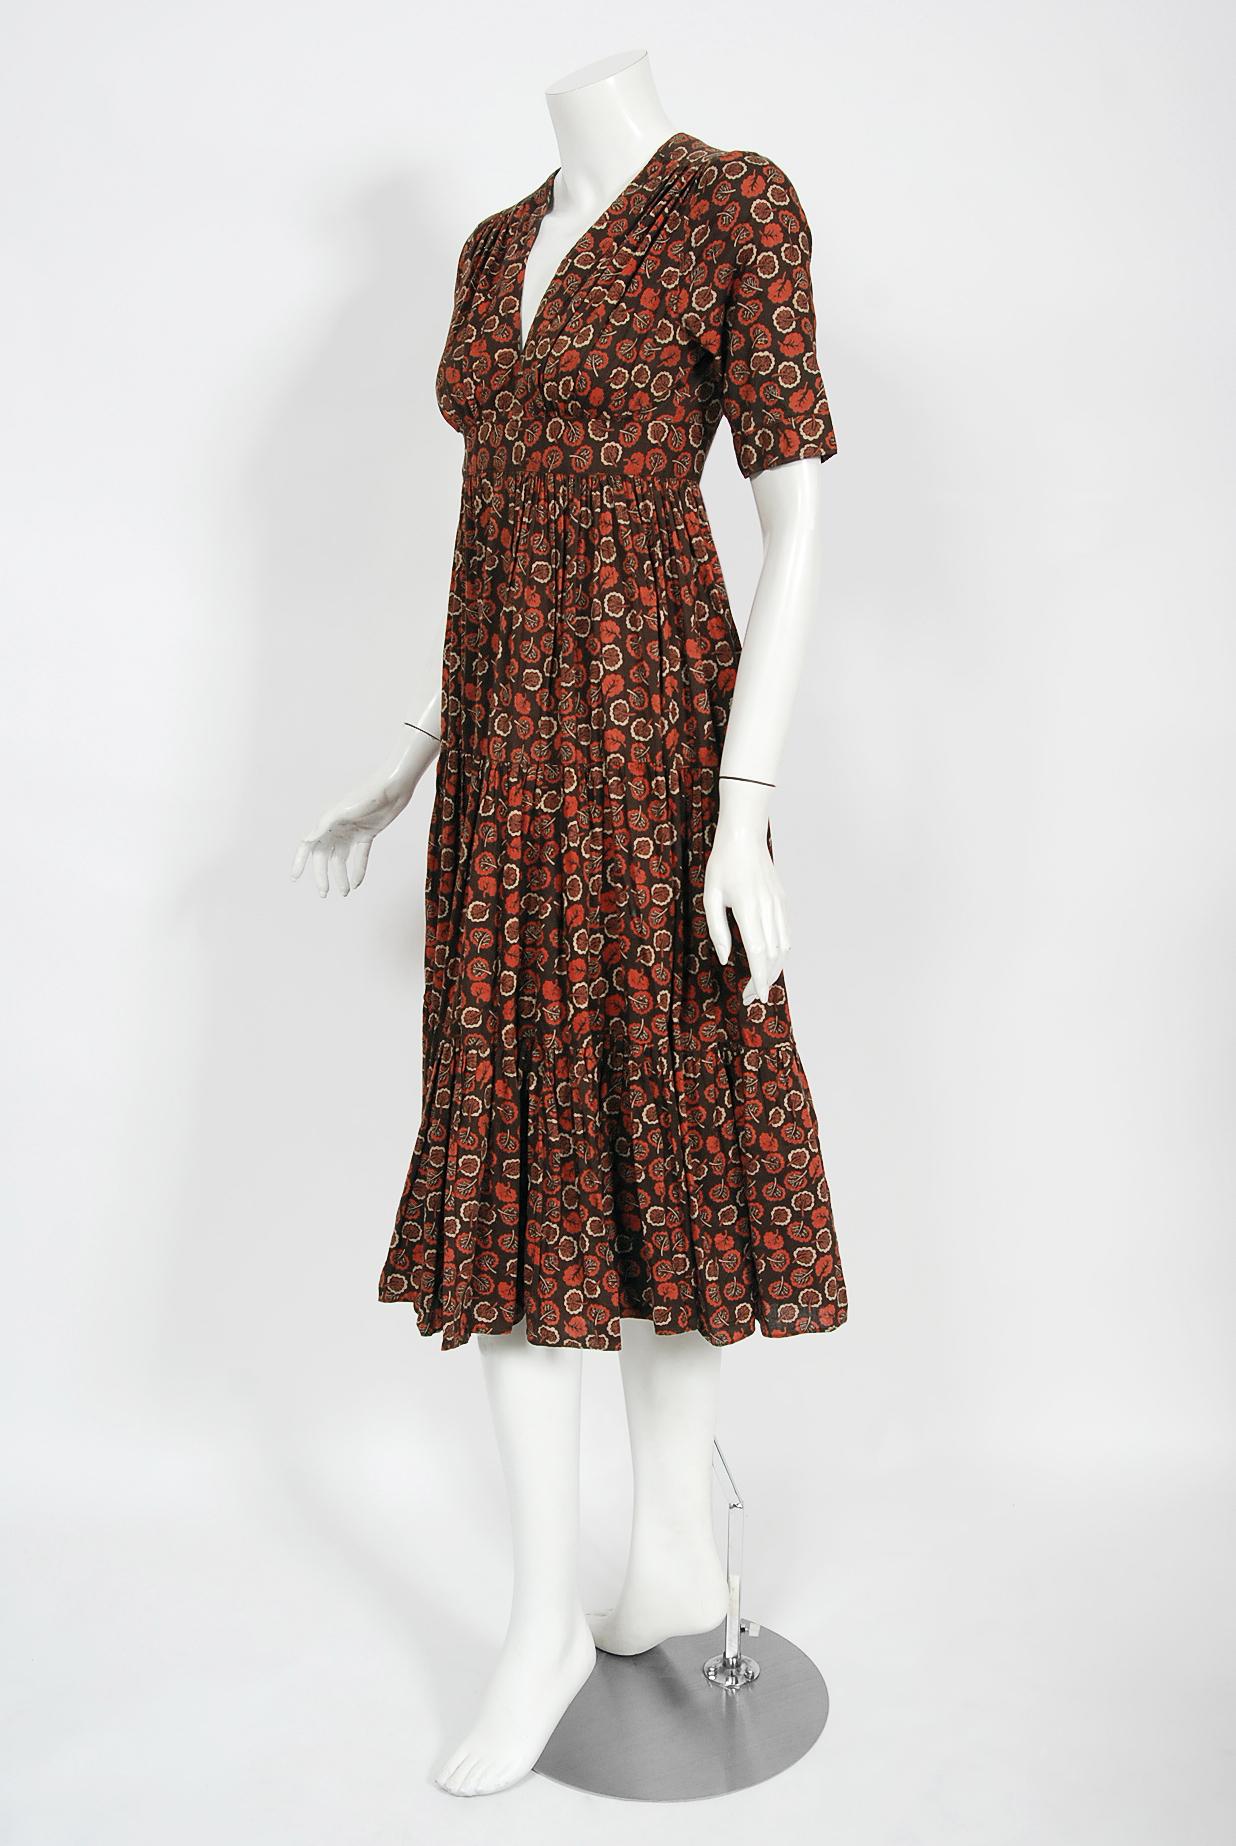 Vintage 1970s Ossie Clark 'Autumn Leaves' Print Cotton Empire Waist Plunge Dress In Good Condition For Sale In Beverly Hills, CA